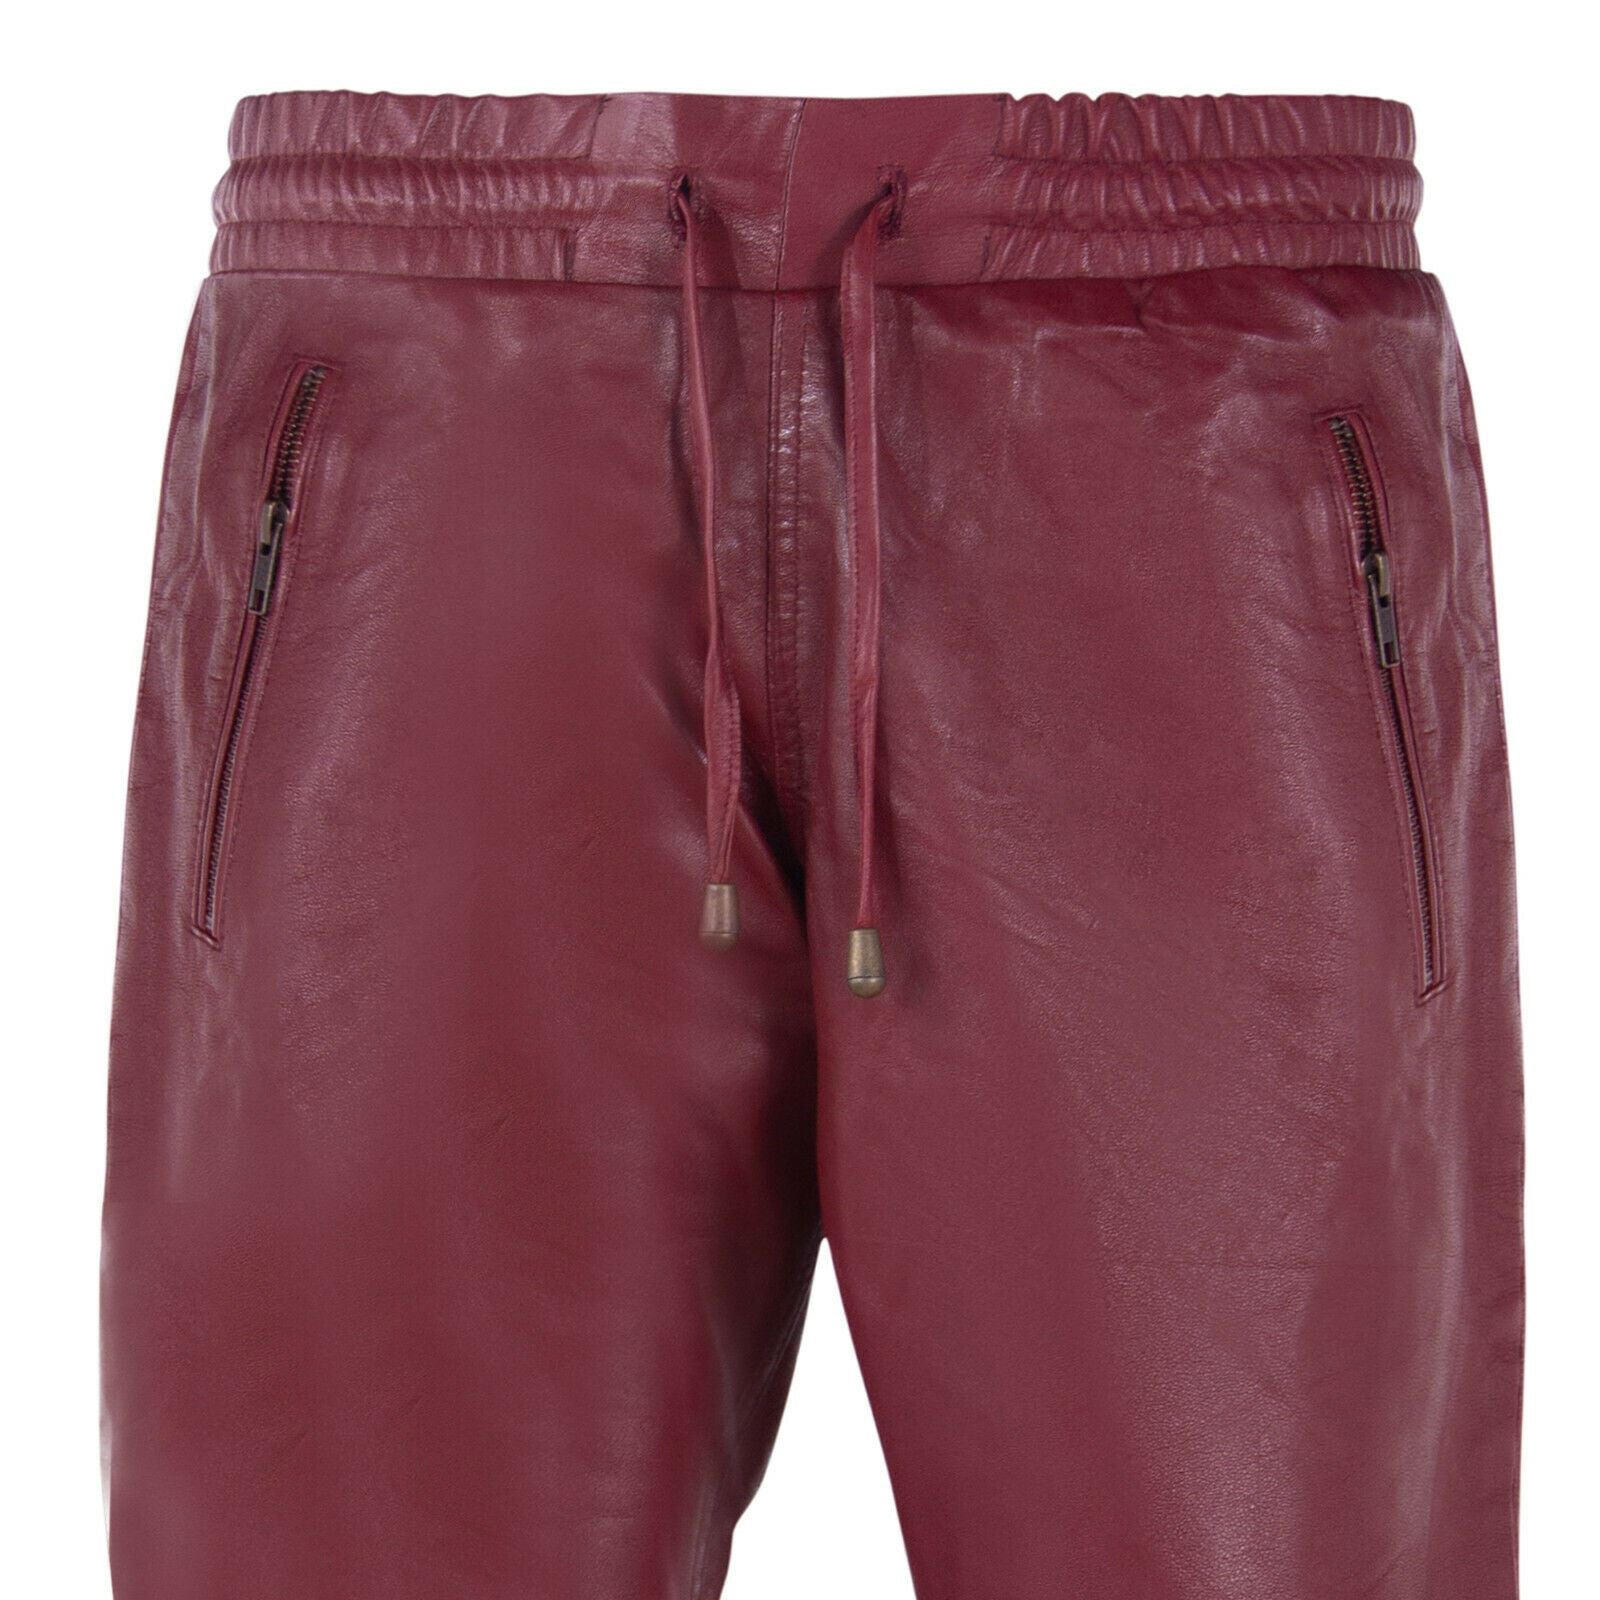 Mens Comfort Leather Jogging Bottoms-Halifax - Upperclass Fashions 